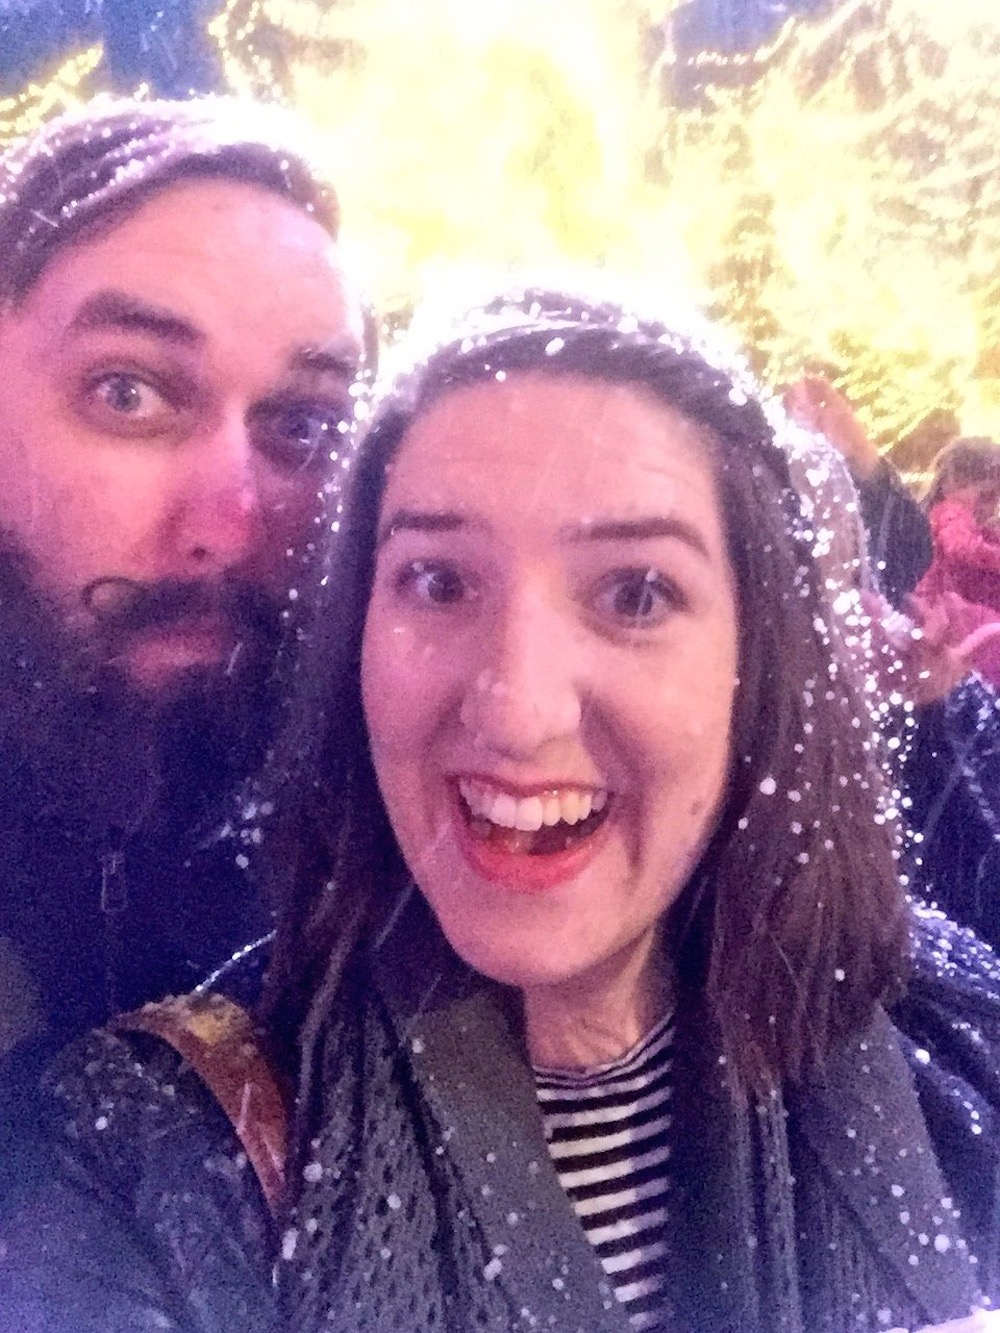 Excited about fake snow at Worlds of Fun's WinterFest in Kansas City, Missouri